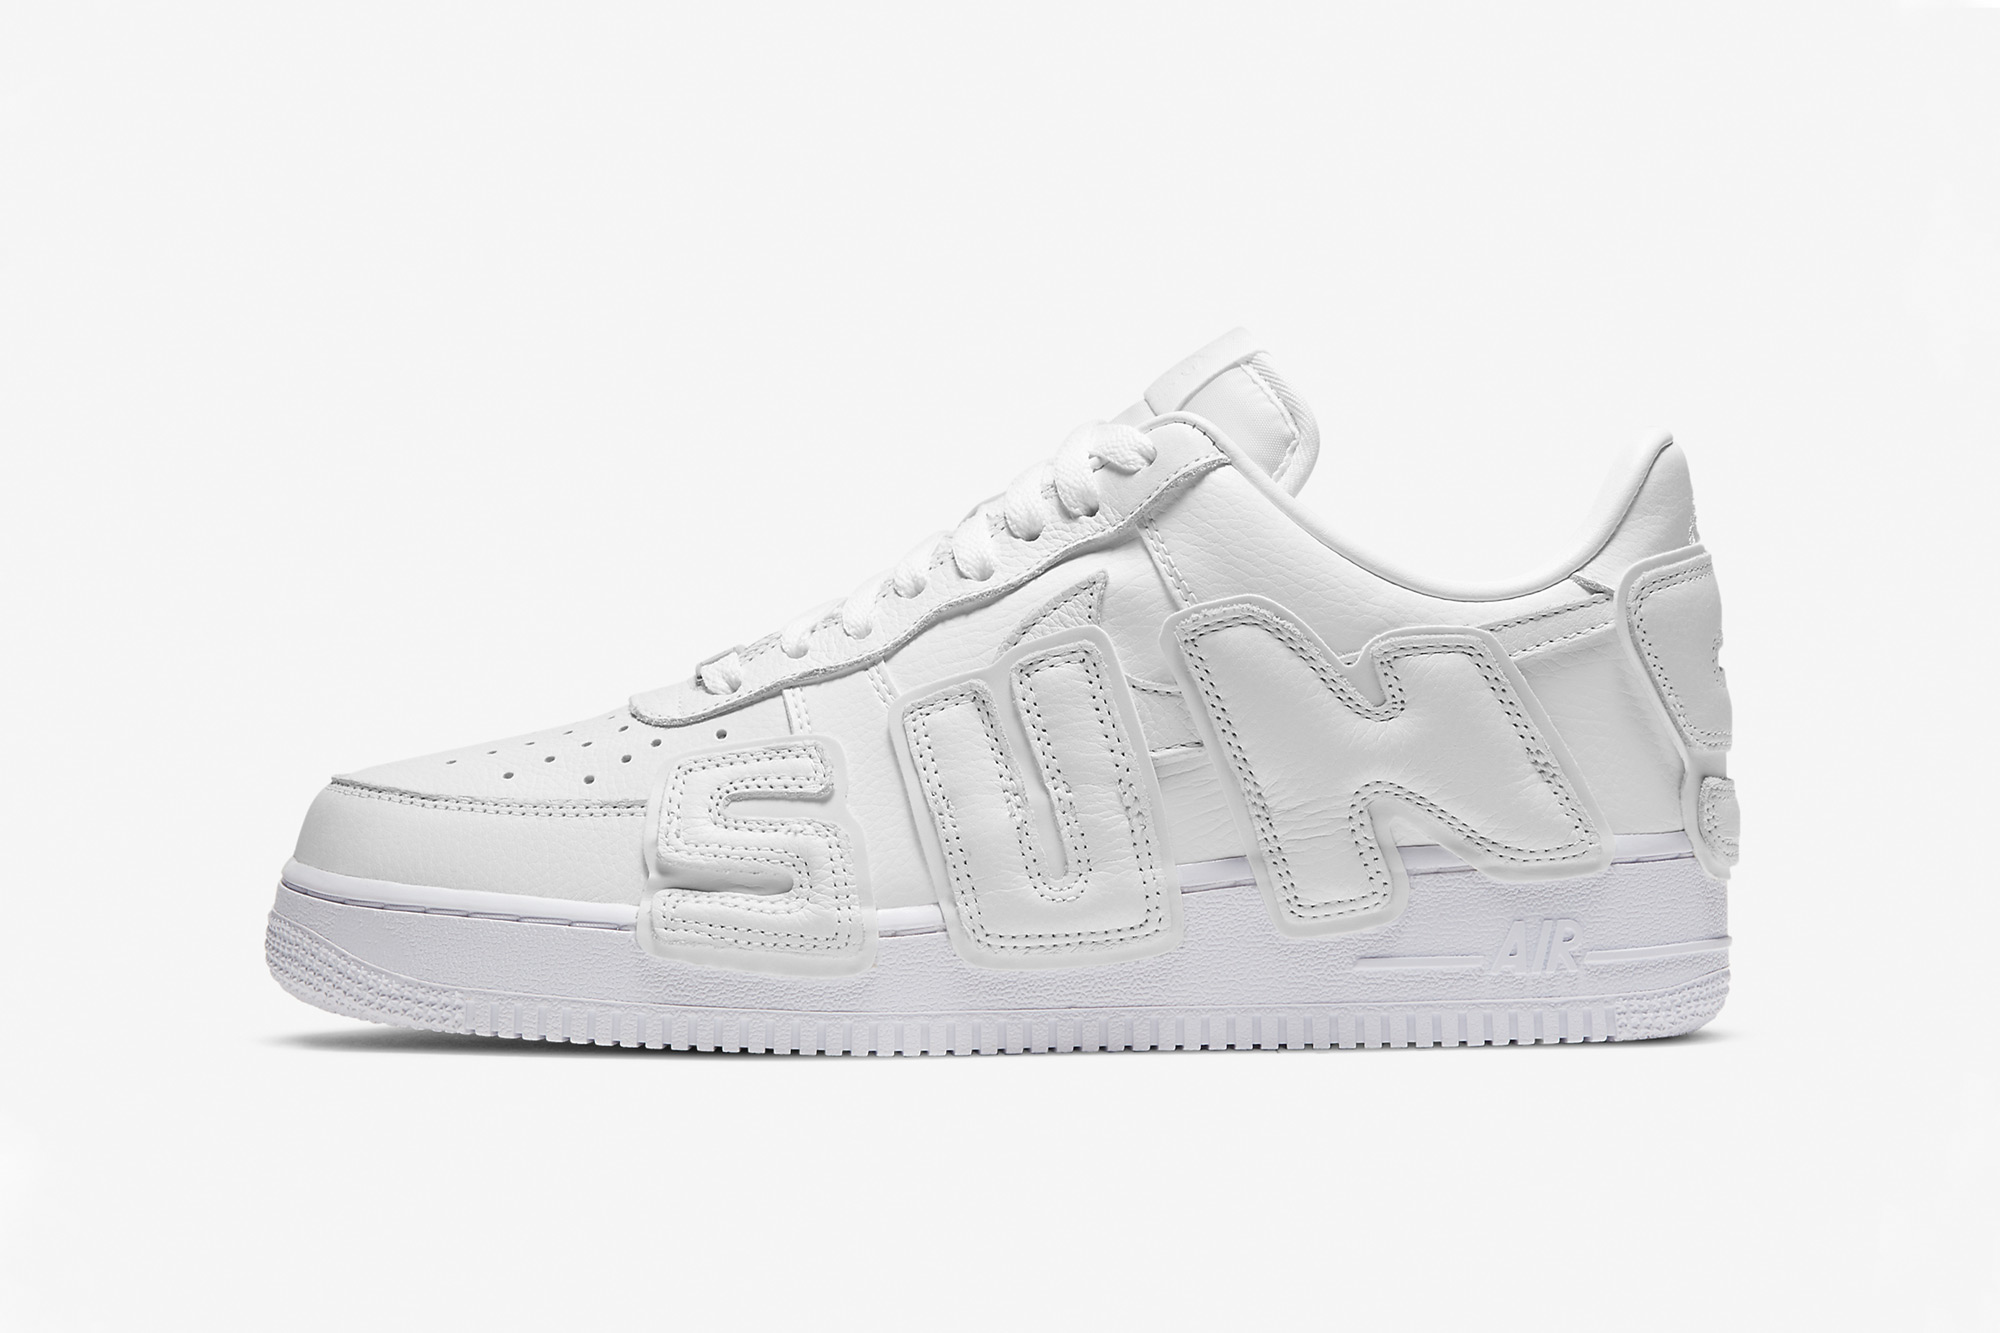 Cactus Plant Flea Market x Nike Air Force 1 Low Official Images White DD7050-100 Release Date September 10 2020 HYPEBEAST Kicks Footwear Collab Collaboration Drops